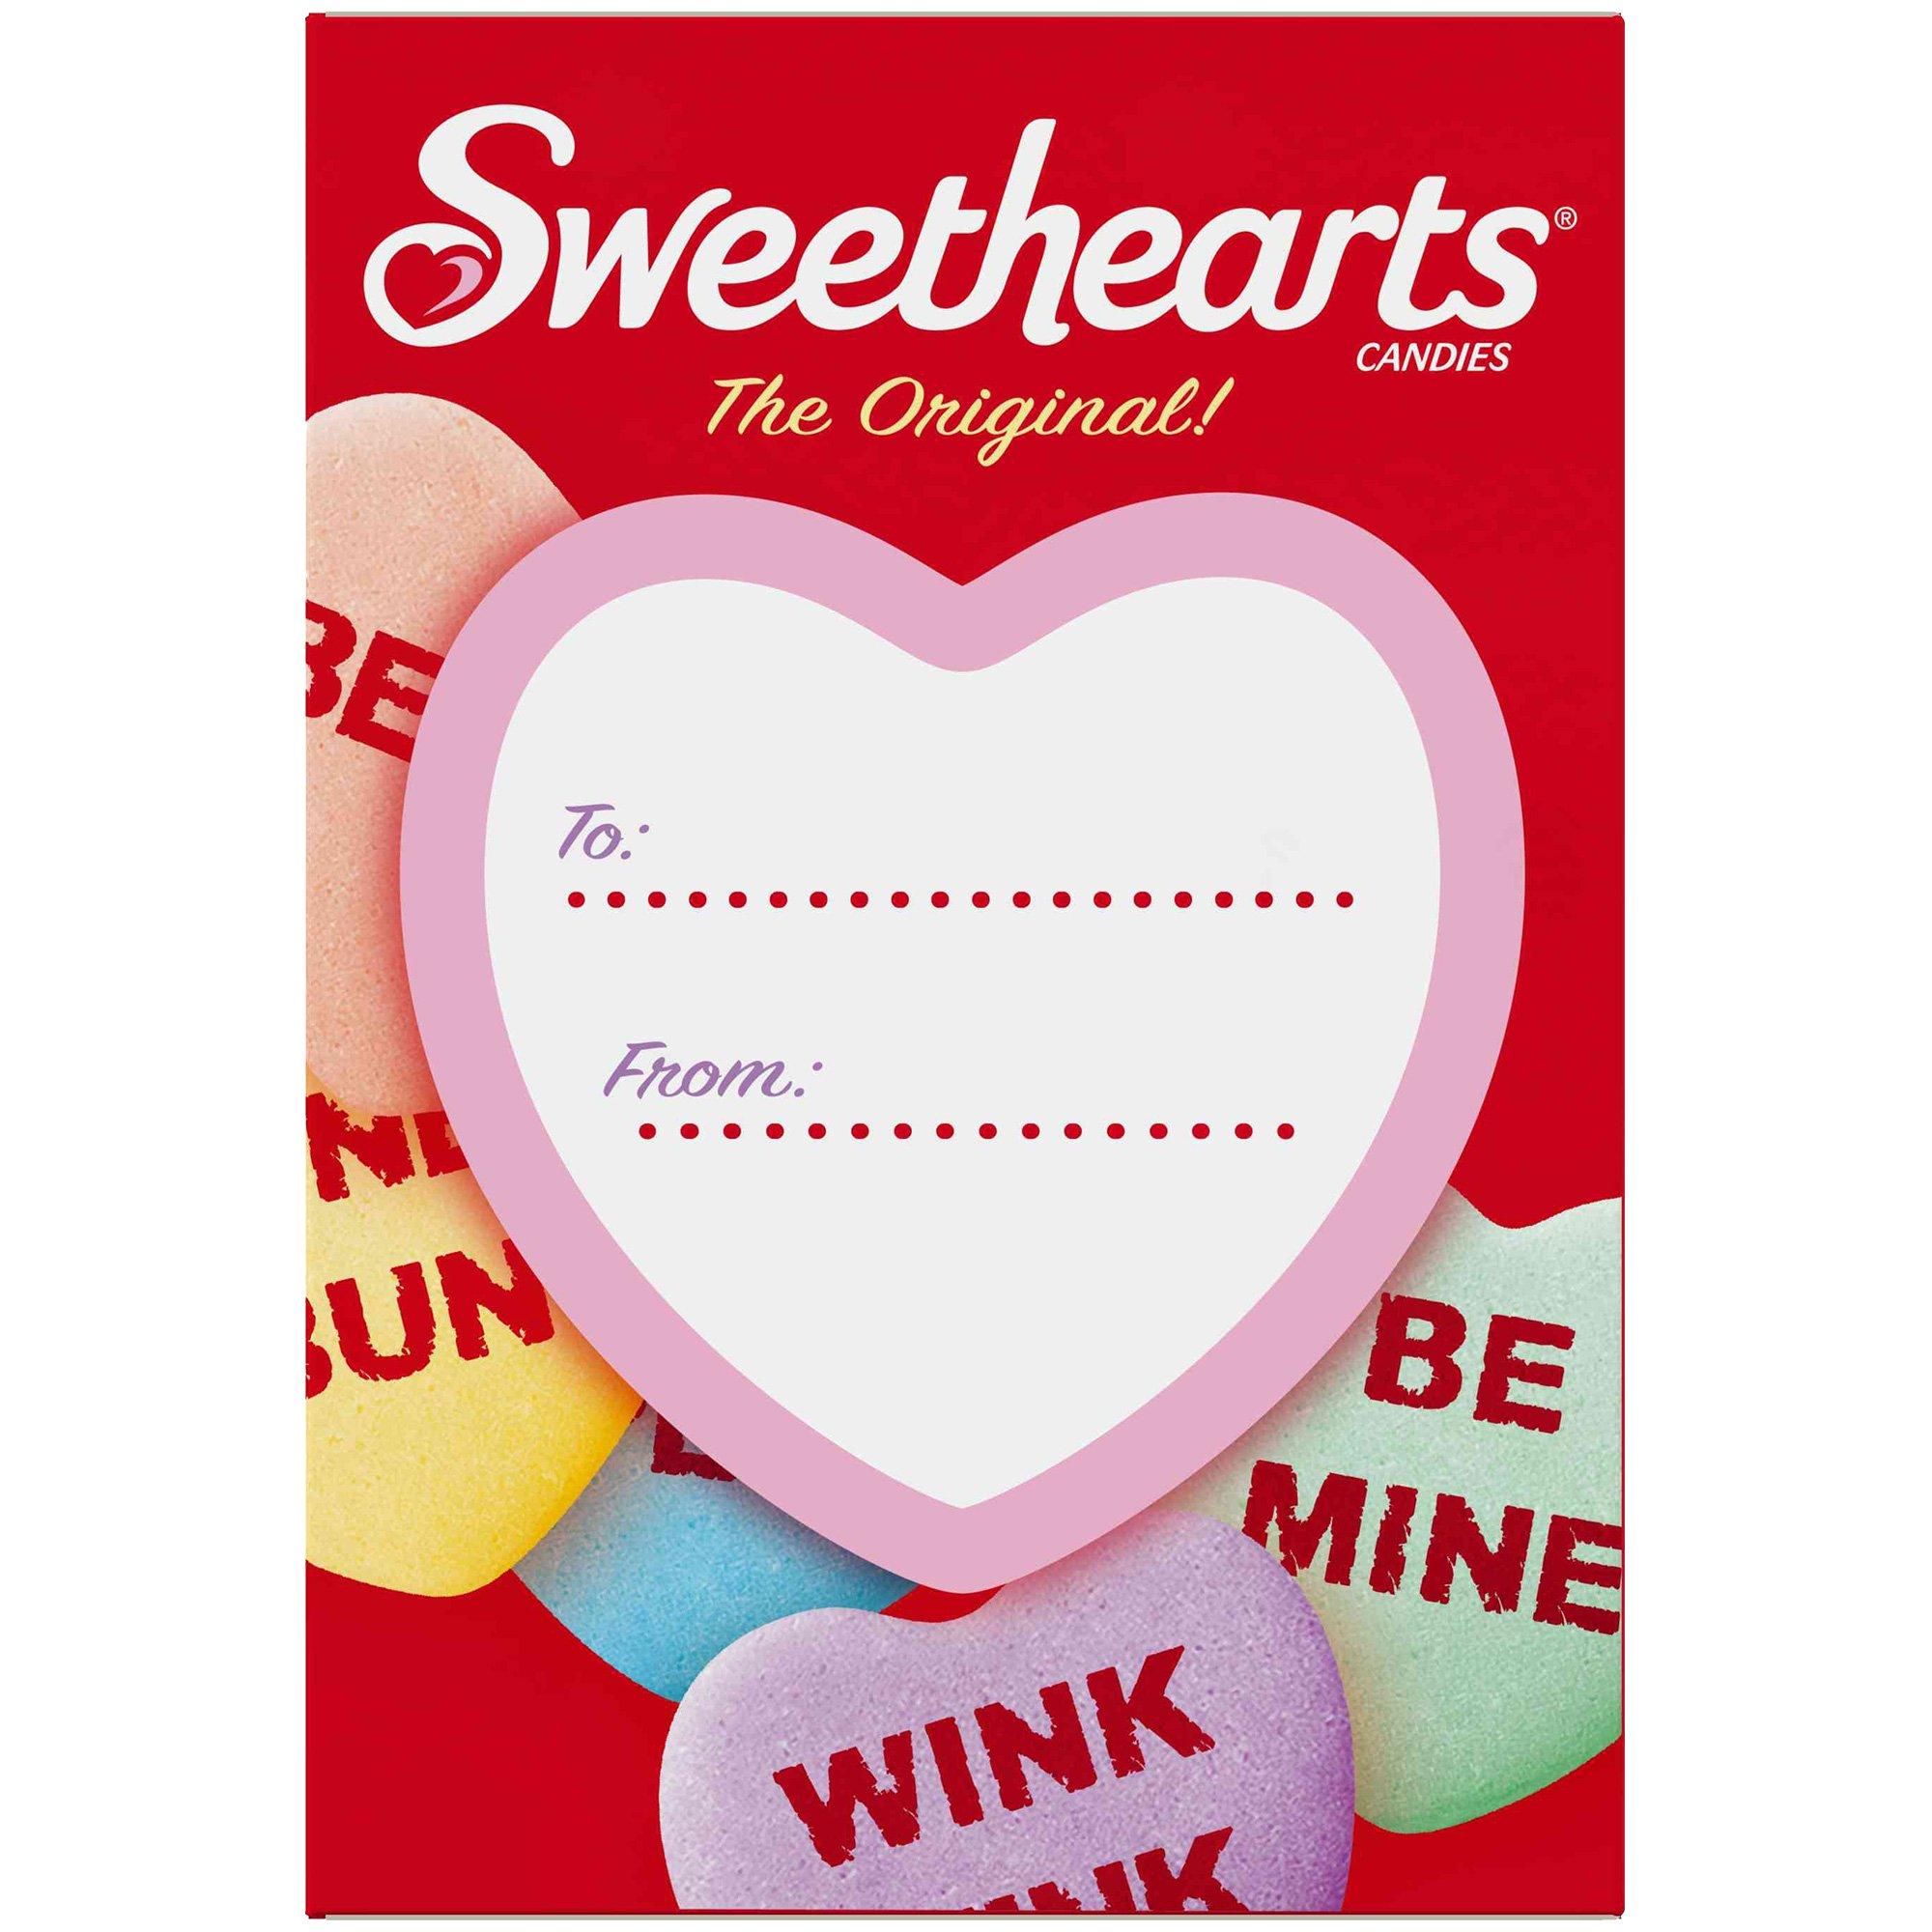 Conversation Hearts Available for Valentine's Day 2021 - Blair Candy Company